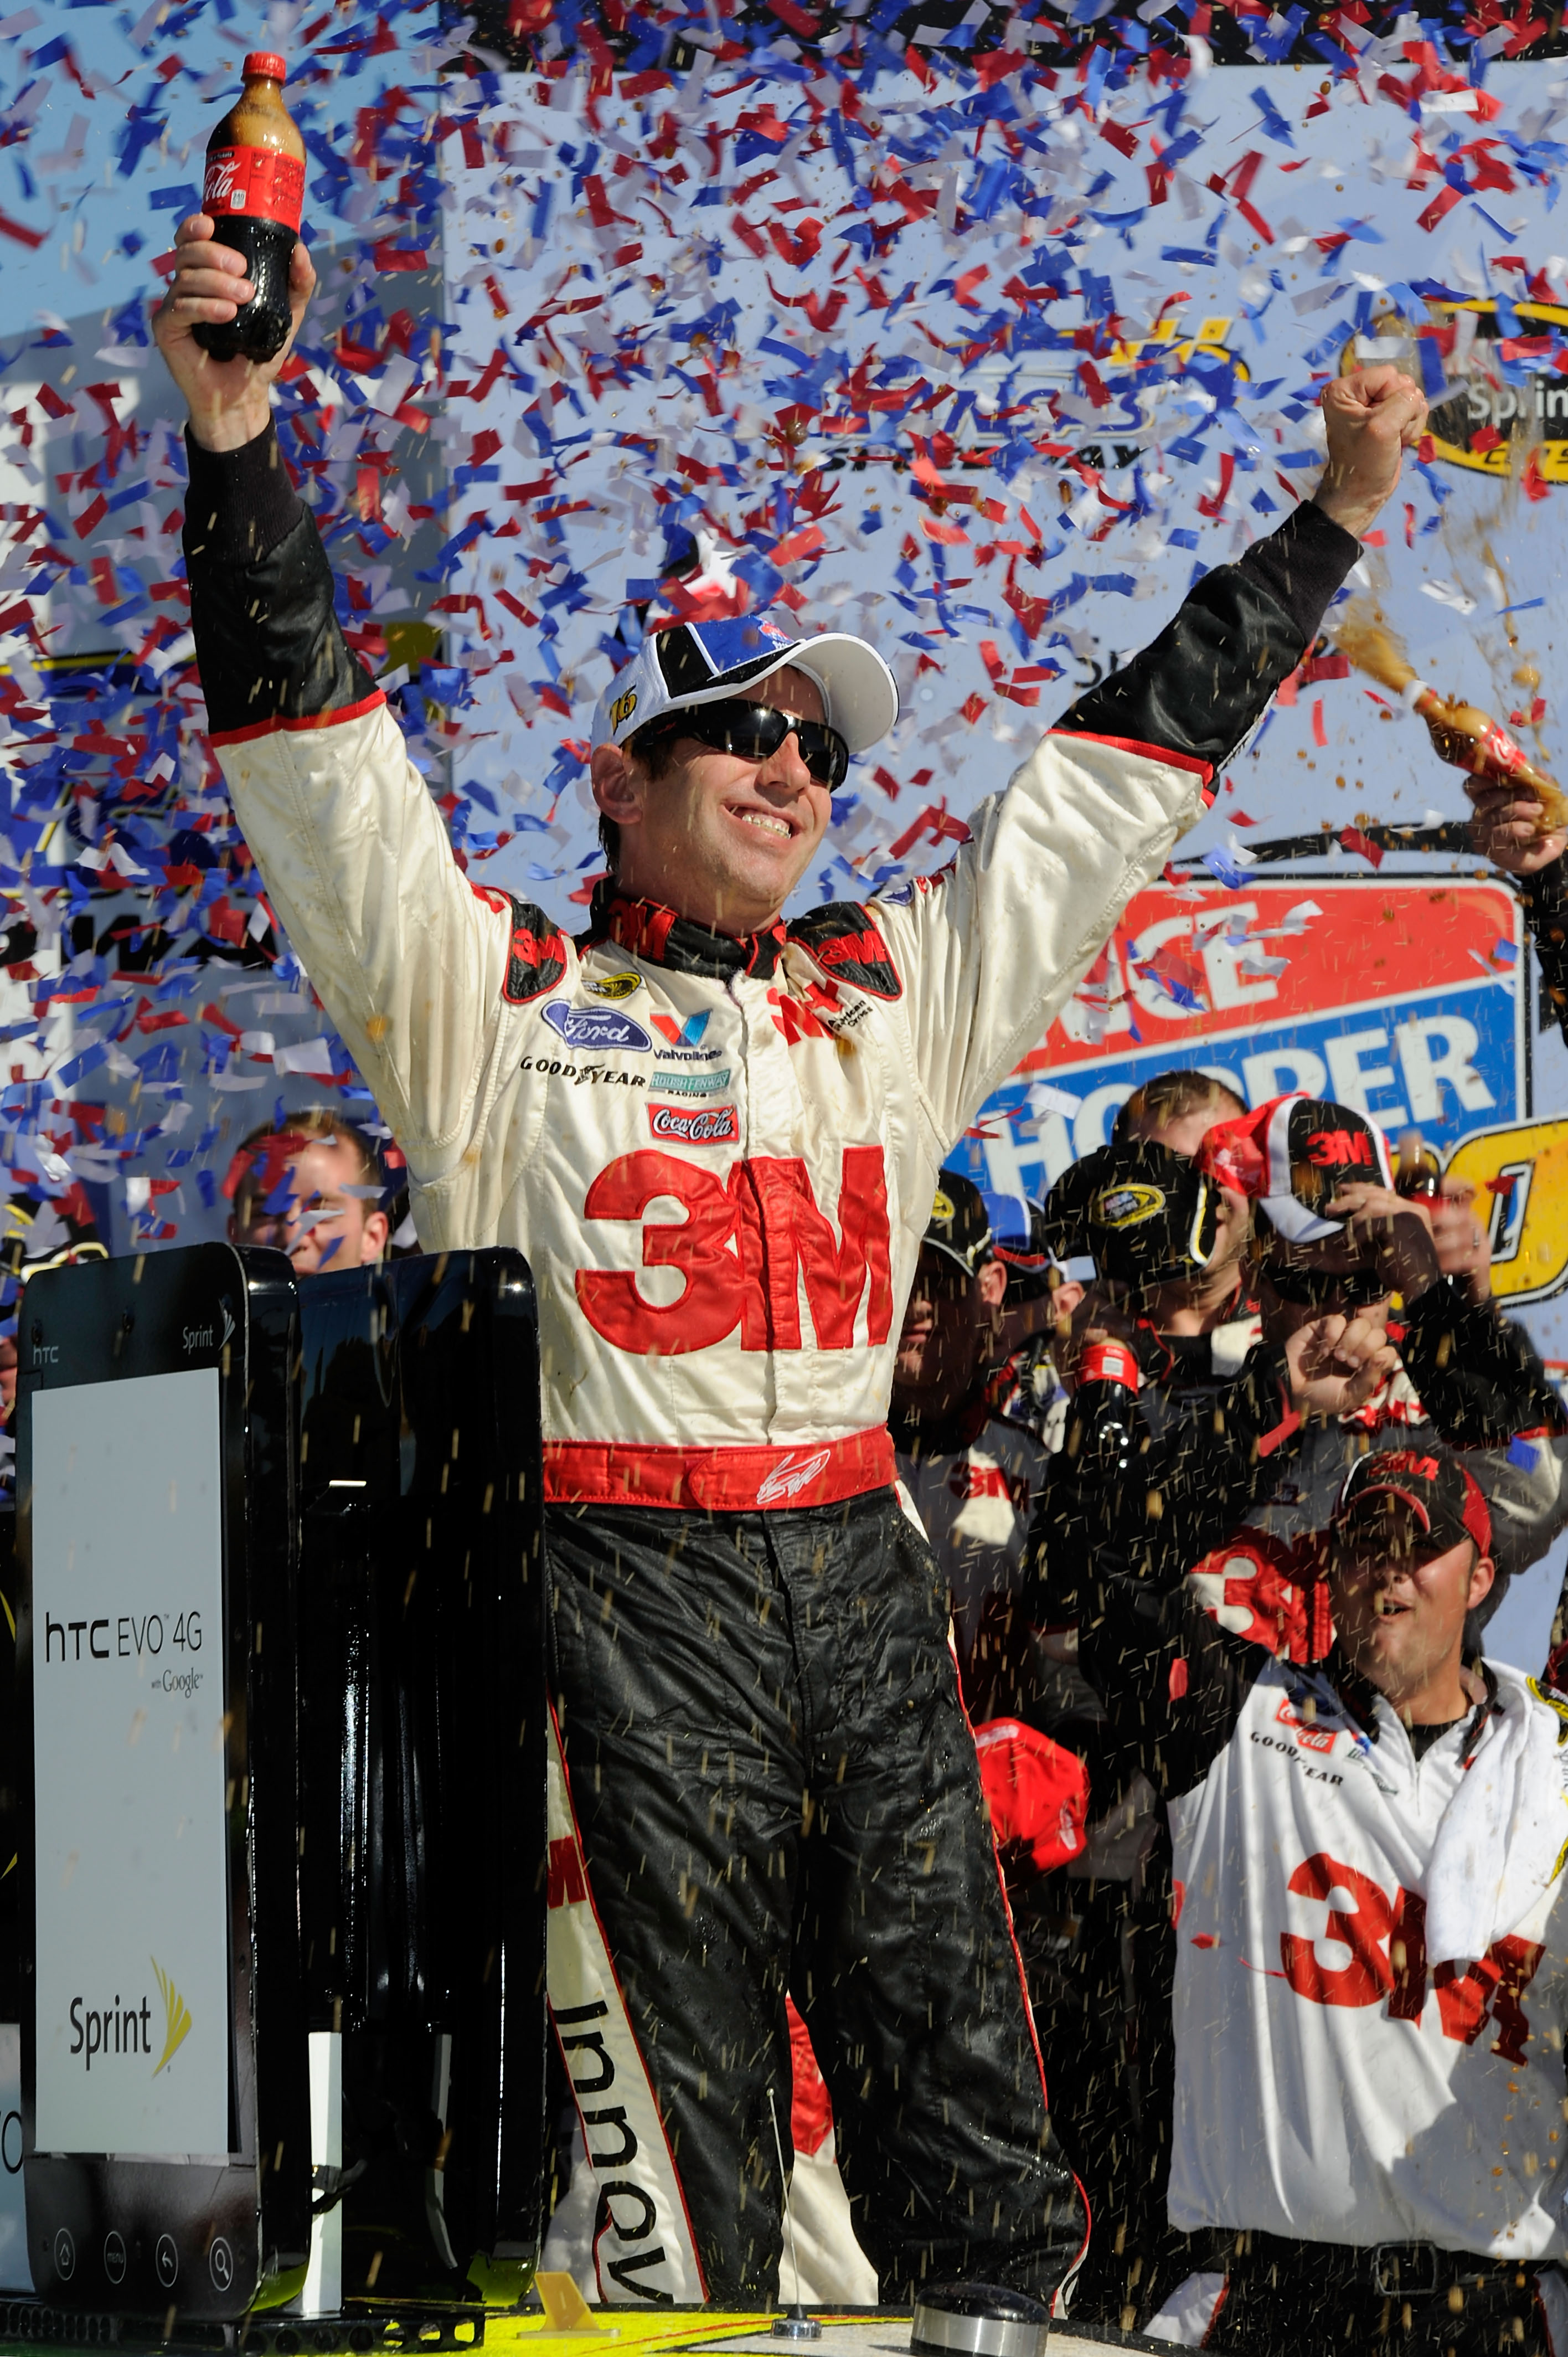 KANSAS CITY, KS - OCTOBER 03:  Greg Biffle, driver of the #16 3M Ford, celebrates in victory lane after winning the NASCAR Sprint Cup Series Price Chopper 400 on October 3, 2010 in Kansas City, Kansas.  (Photo by John Harrelson/Getty Images for NASCAR)